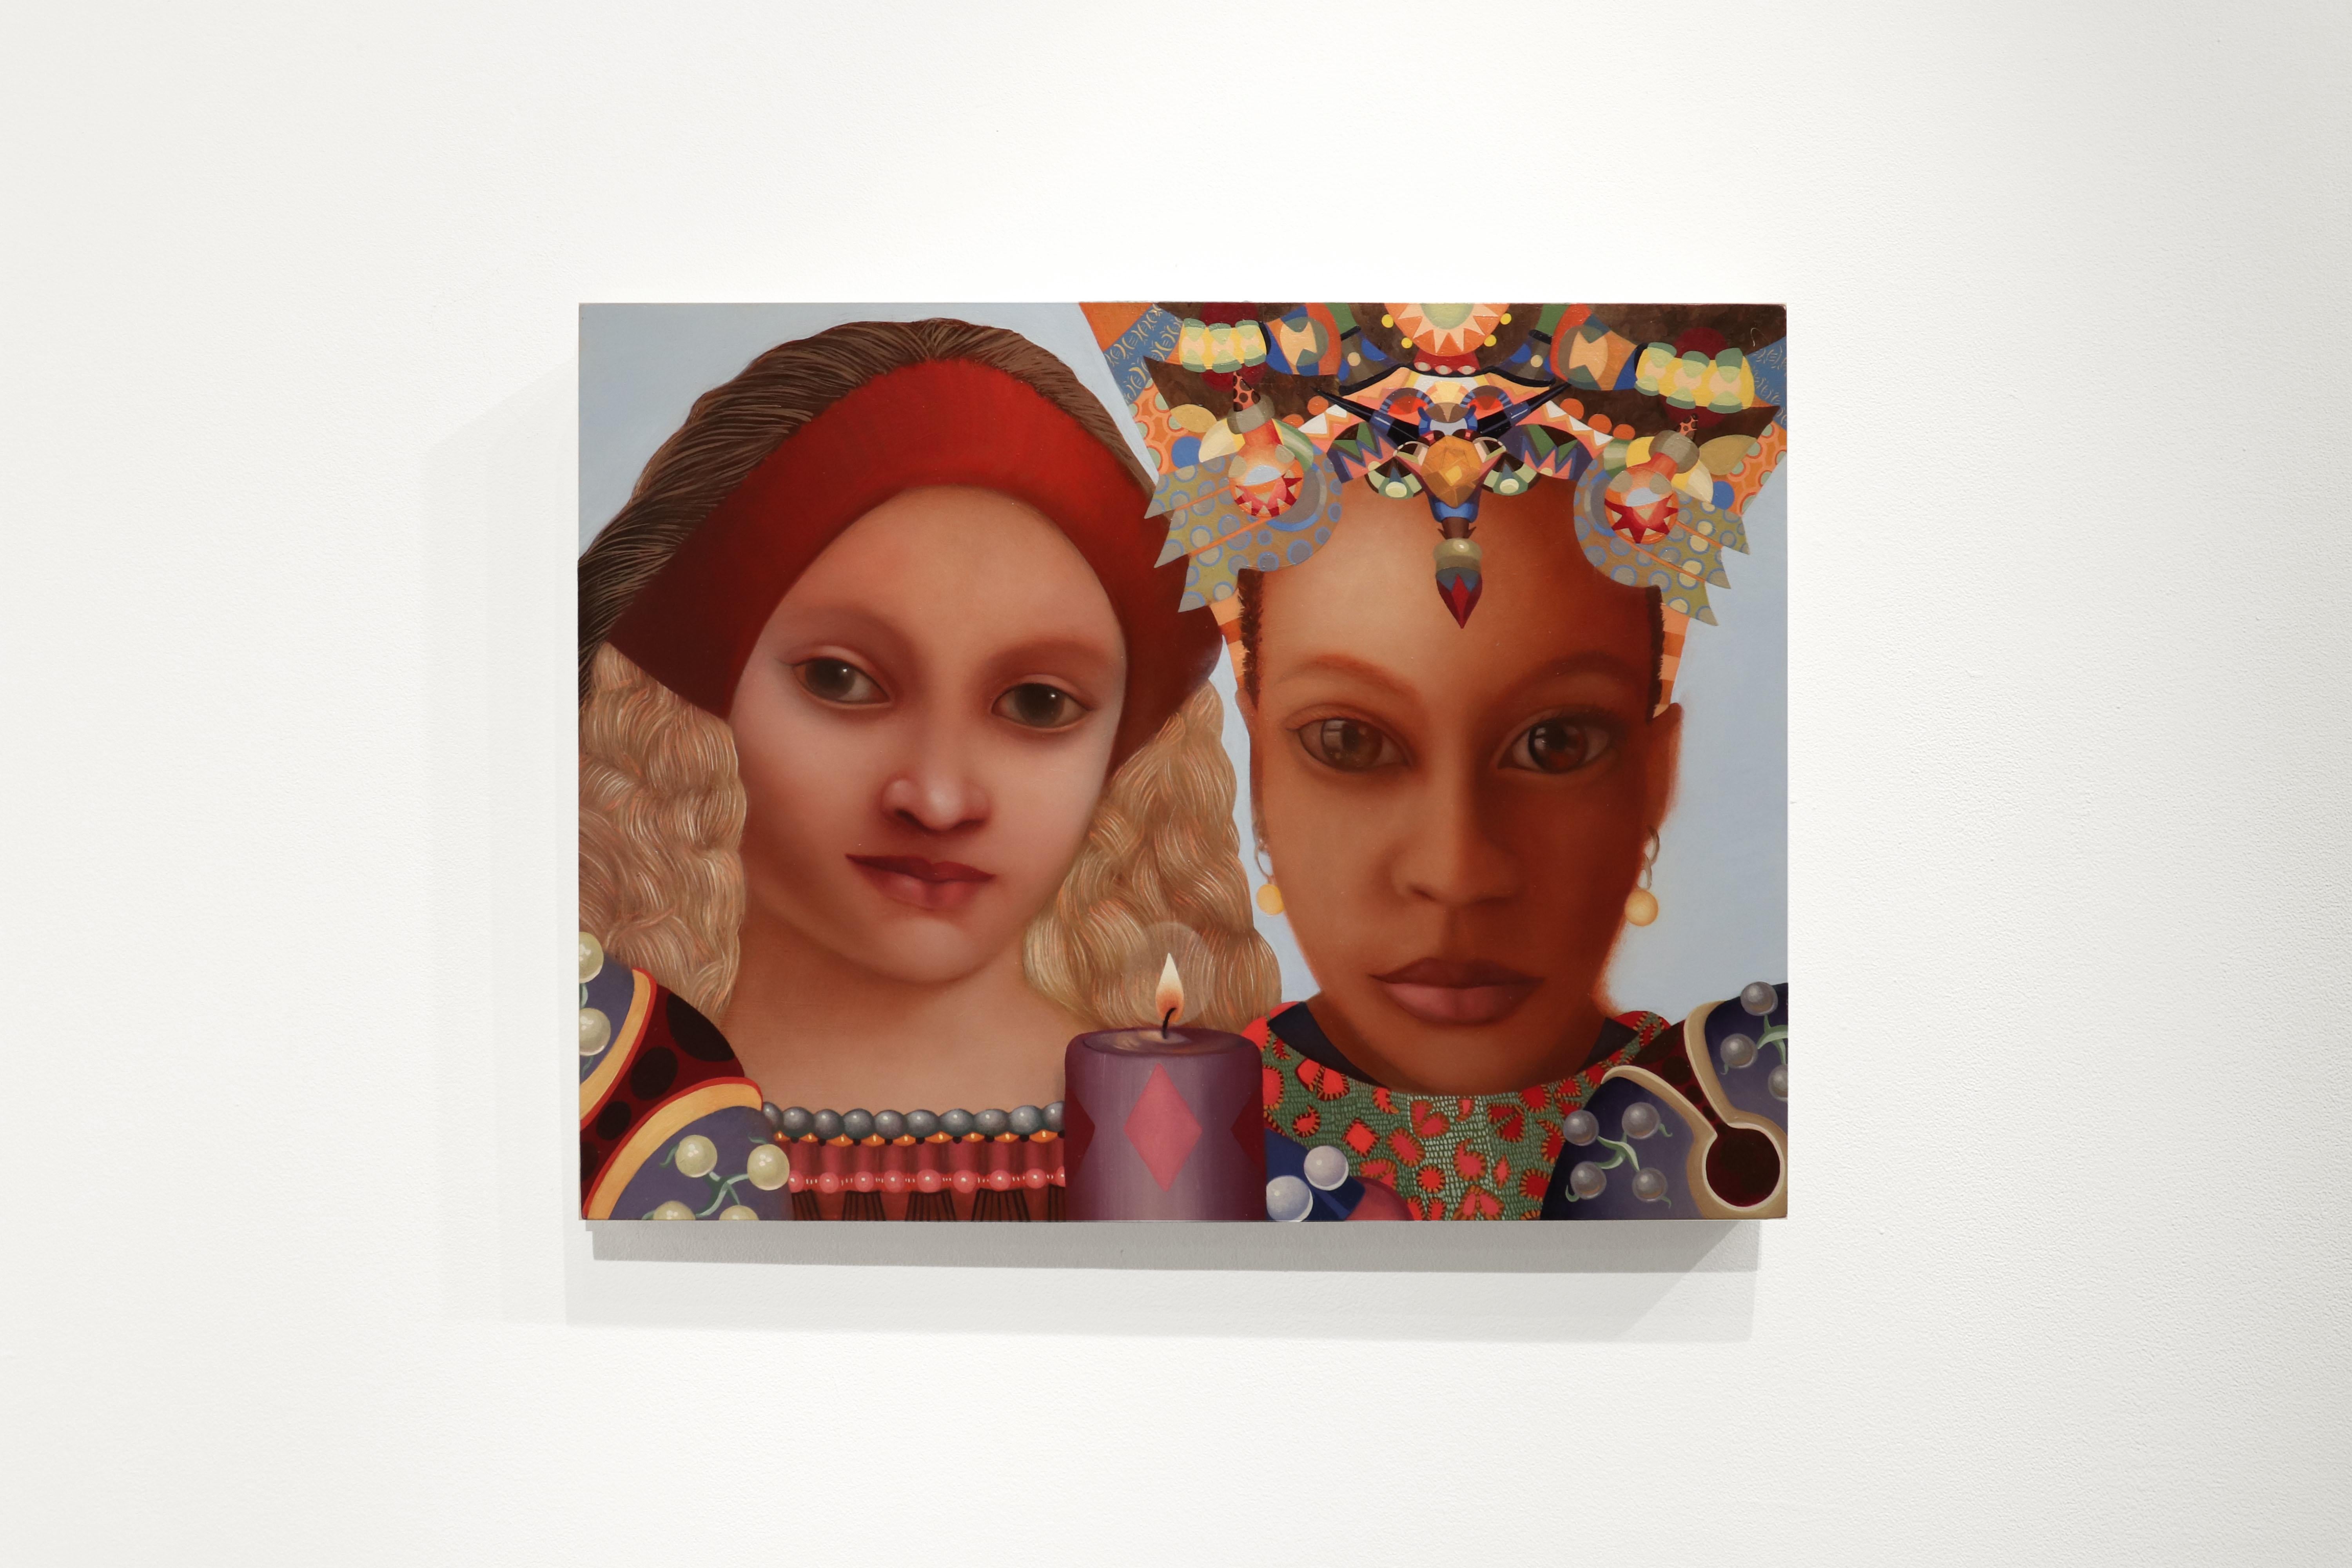 THE VISITATION - Contemporary Realism / Female Portrait / Jeweled Headdress - Painting by Jacob Hicks